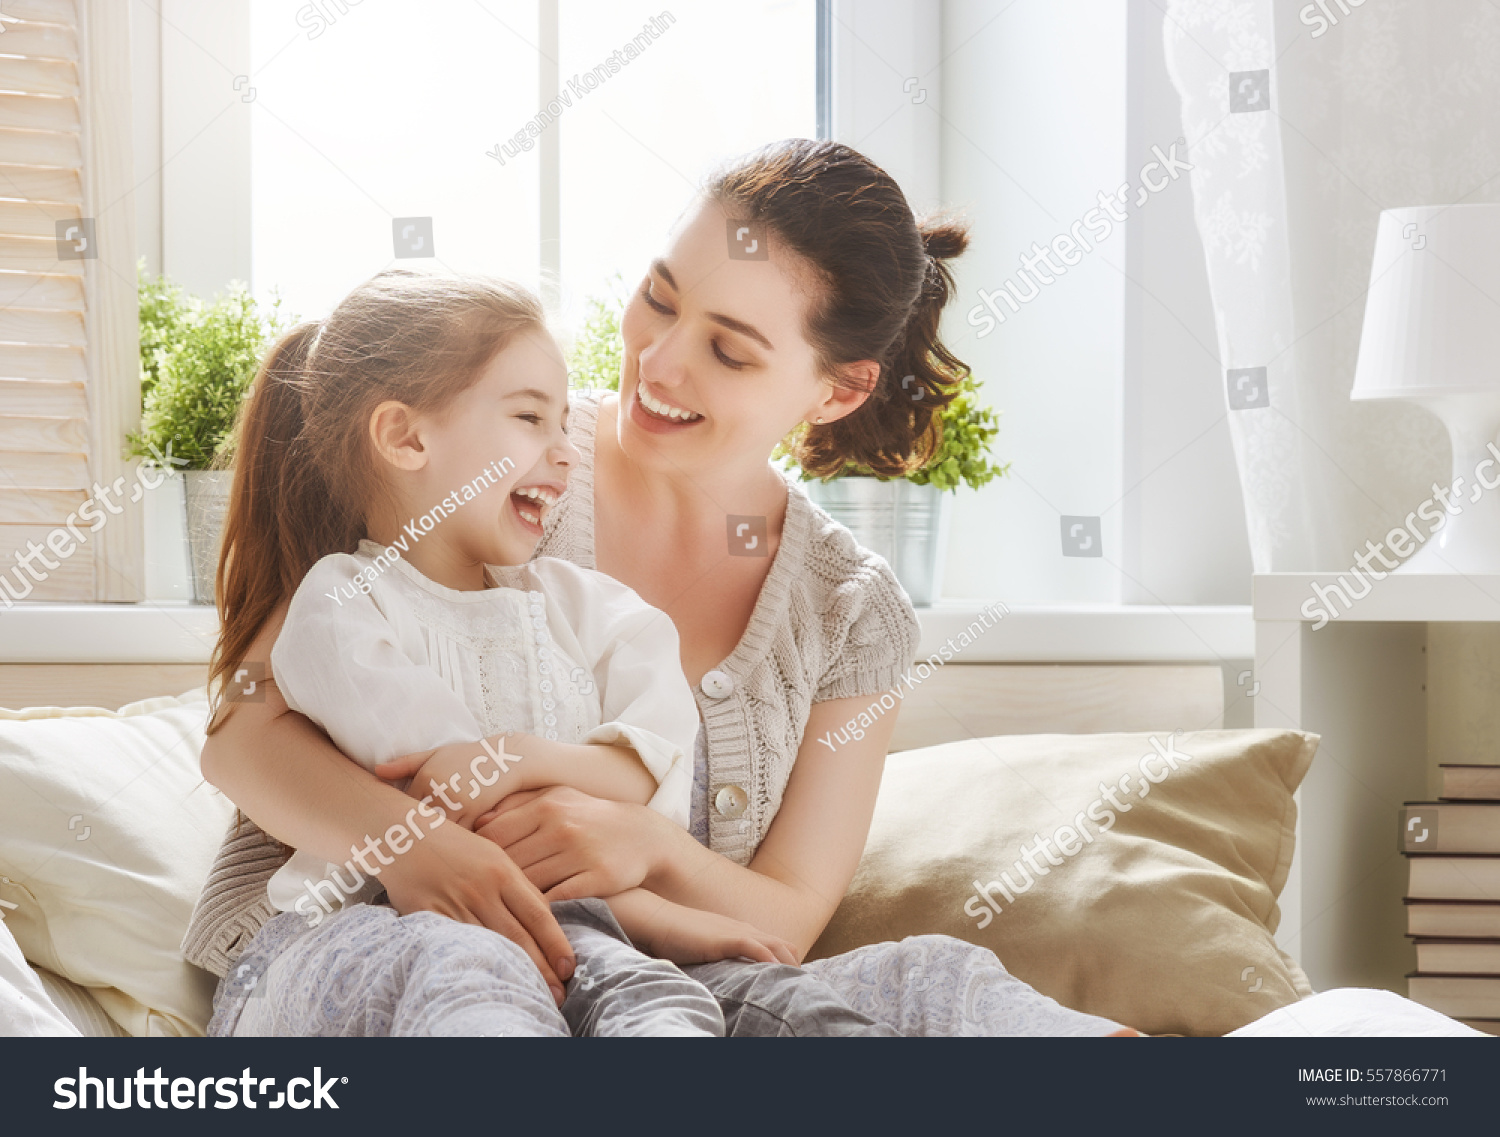 Happy loving family. Mother and her daughter child girl playing and hugging. #557866771